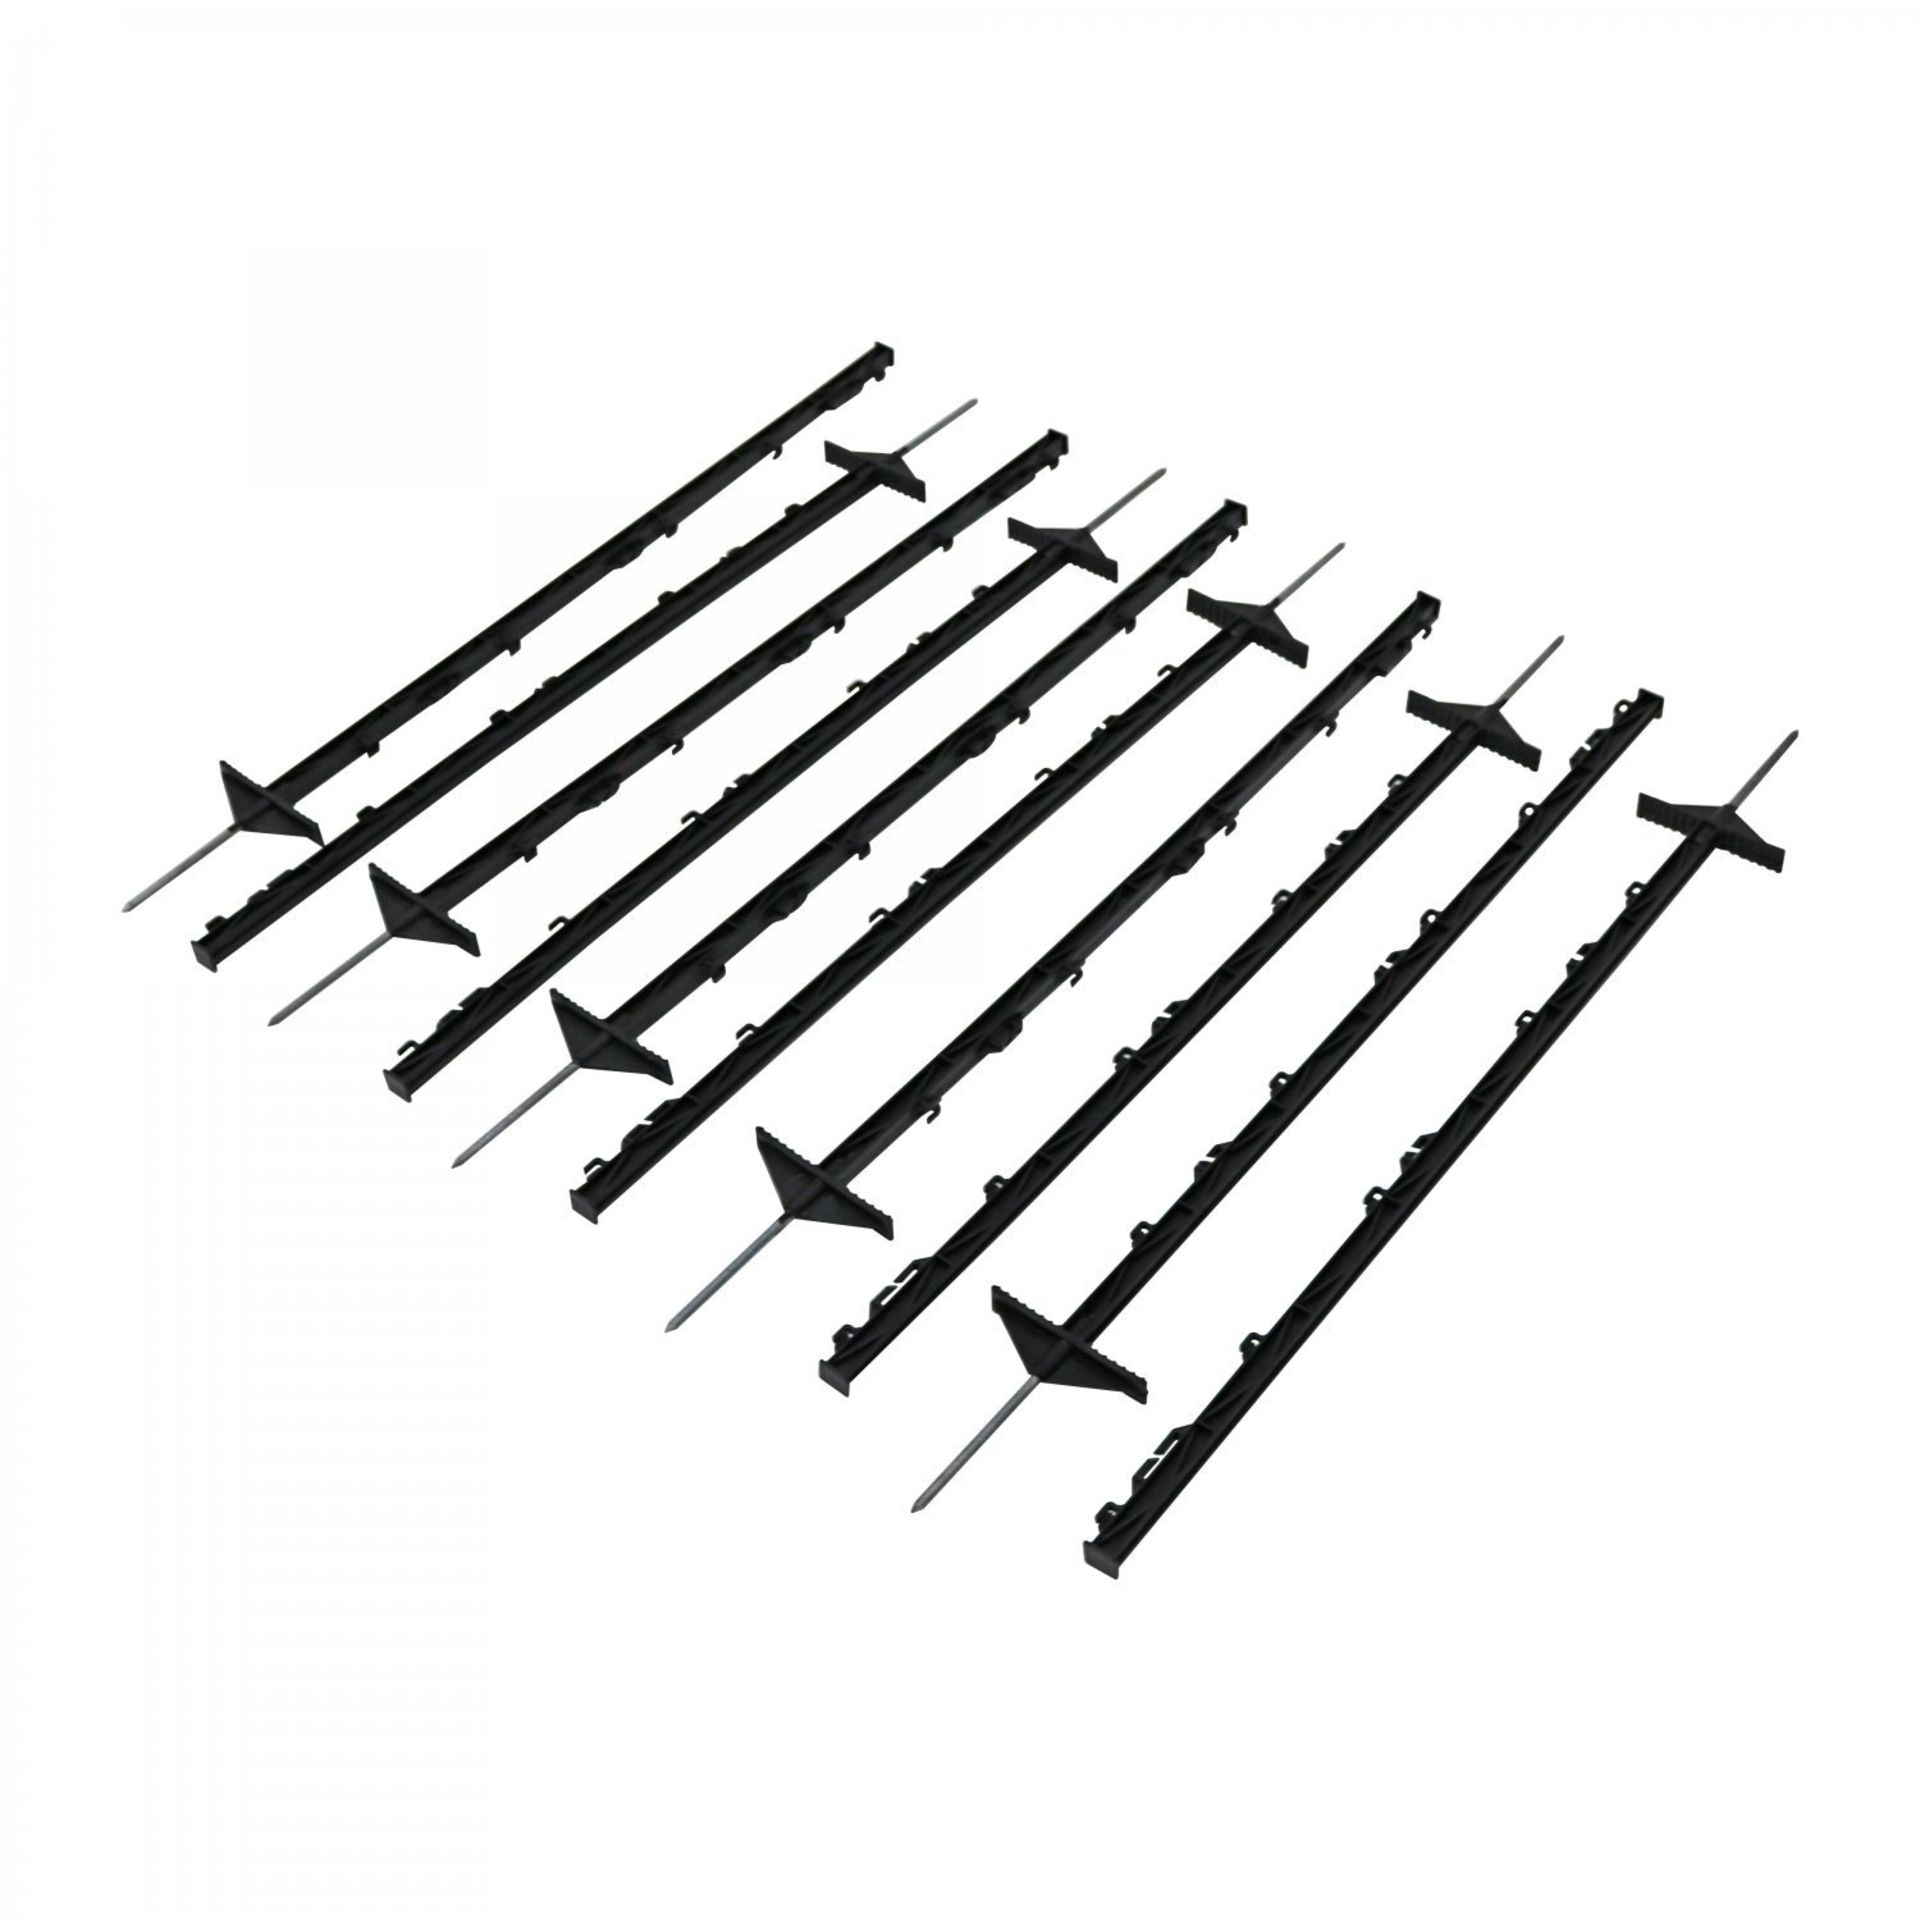 (RL81) 1m Black Plastic Electric Fencing Pins Posts Stakes Pack of 10 The fencing pins are... - Image 2 of 2